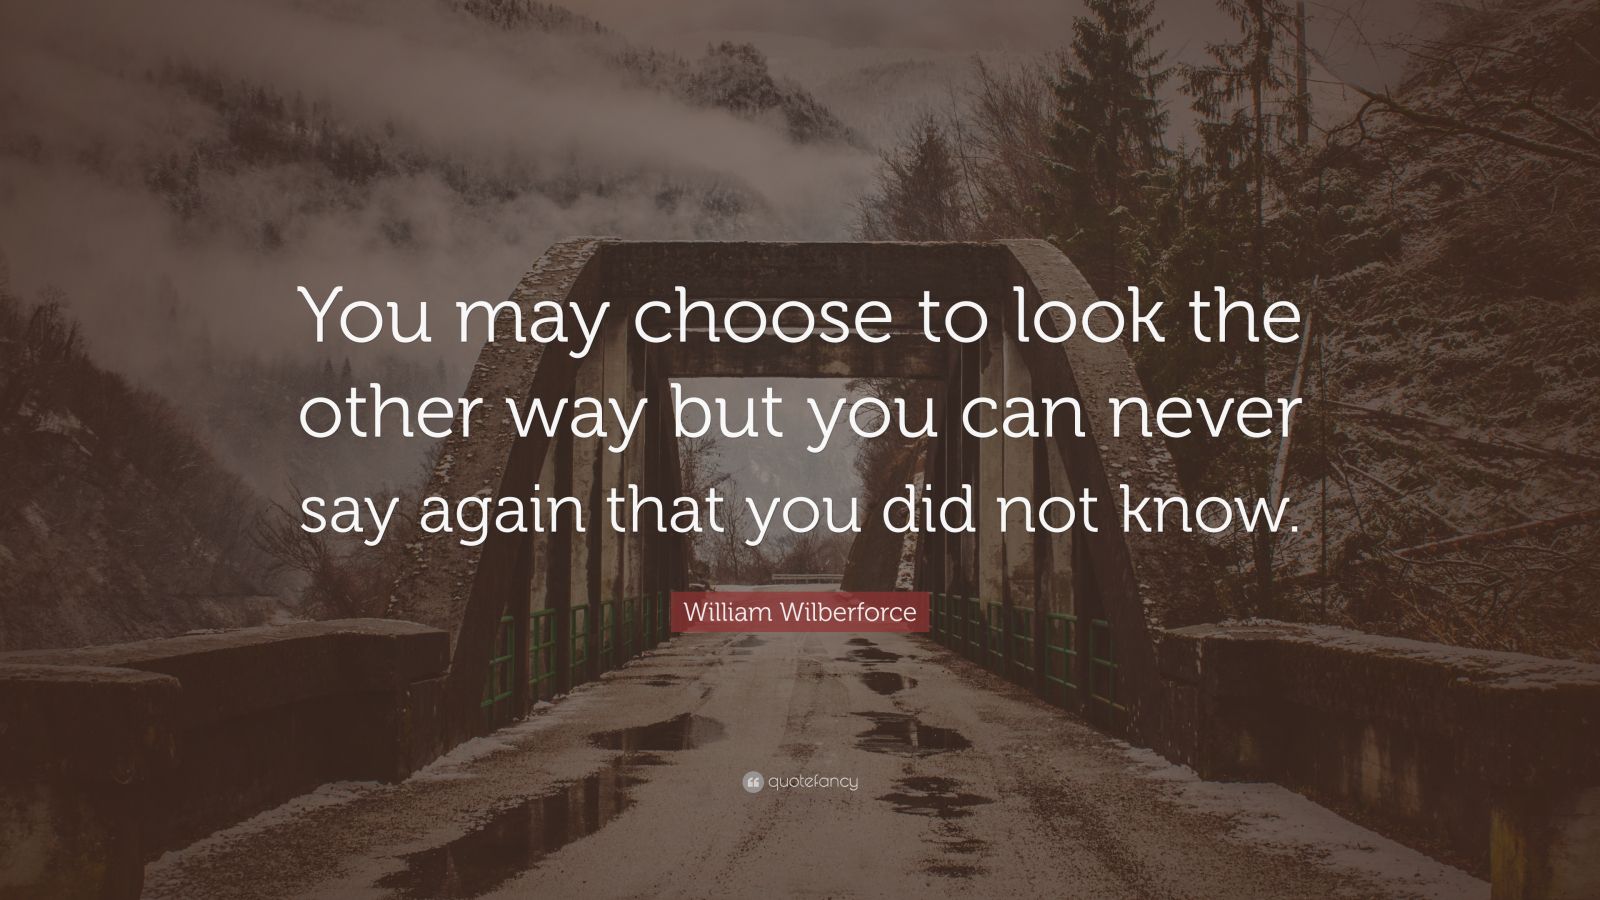 William Wilberforce Quote: “You may choose to look the other way but ...